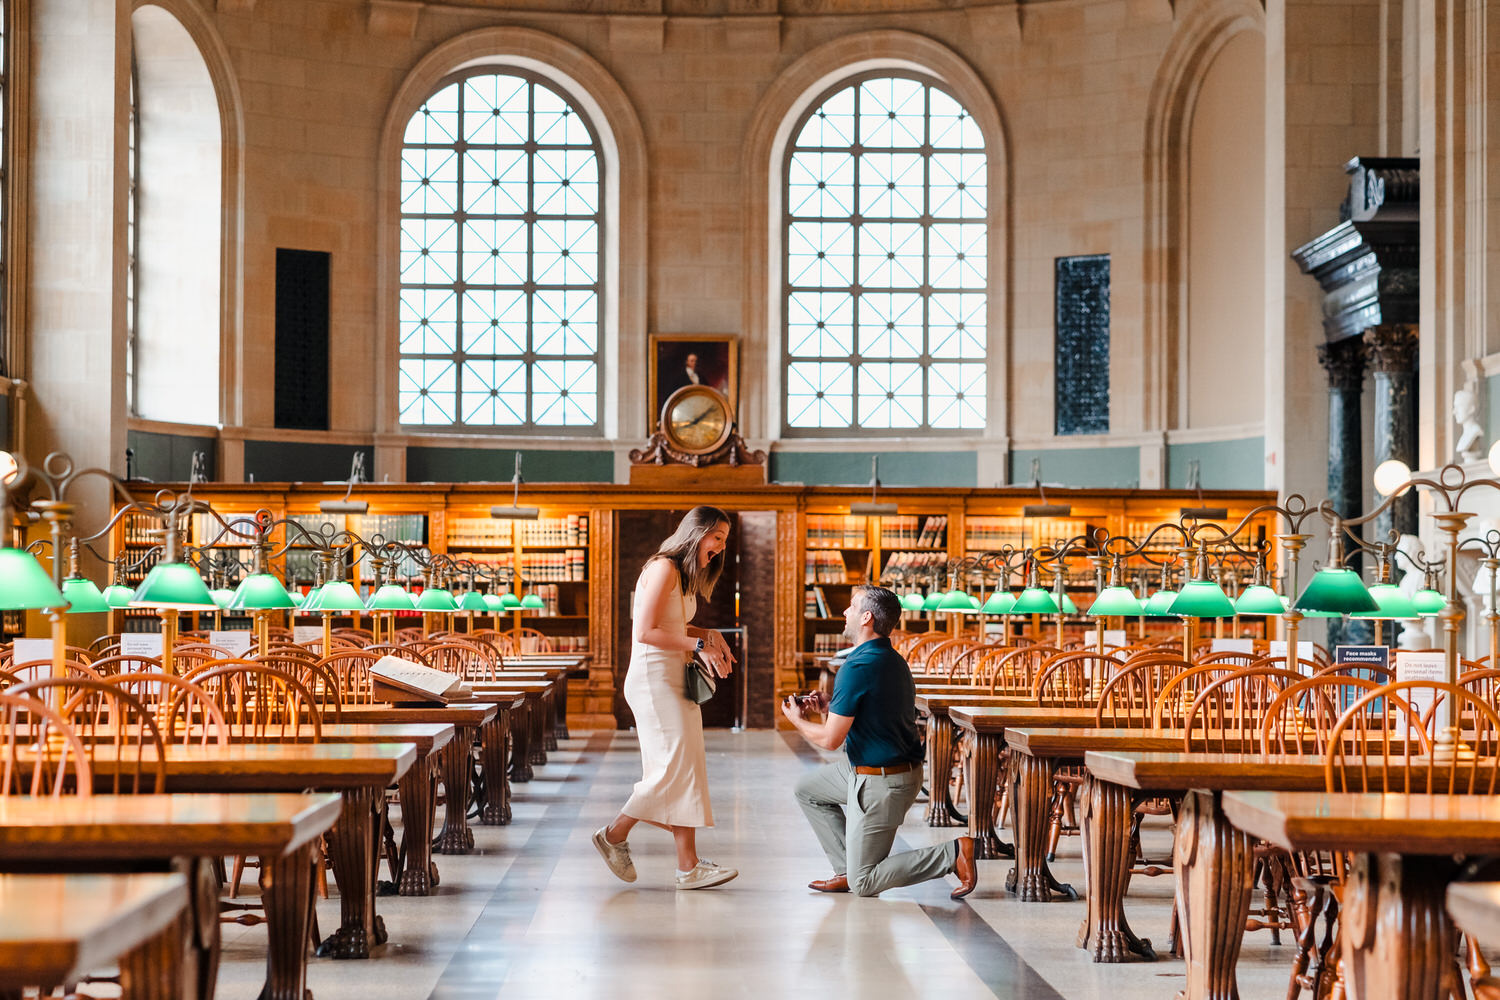 A Boston woman proposes while kneeling in front of a book in a library, captured by a proposal photographer.